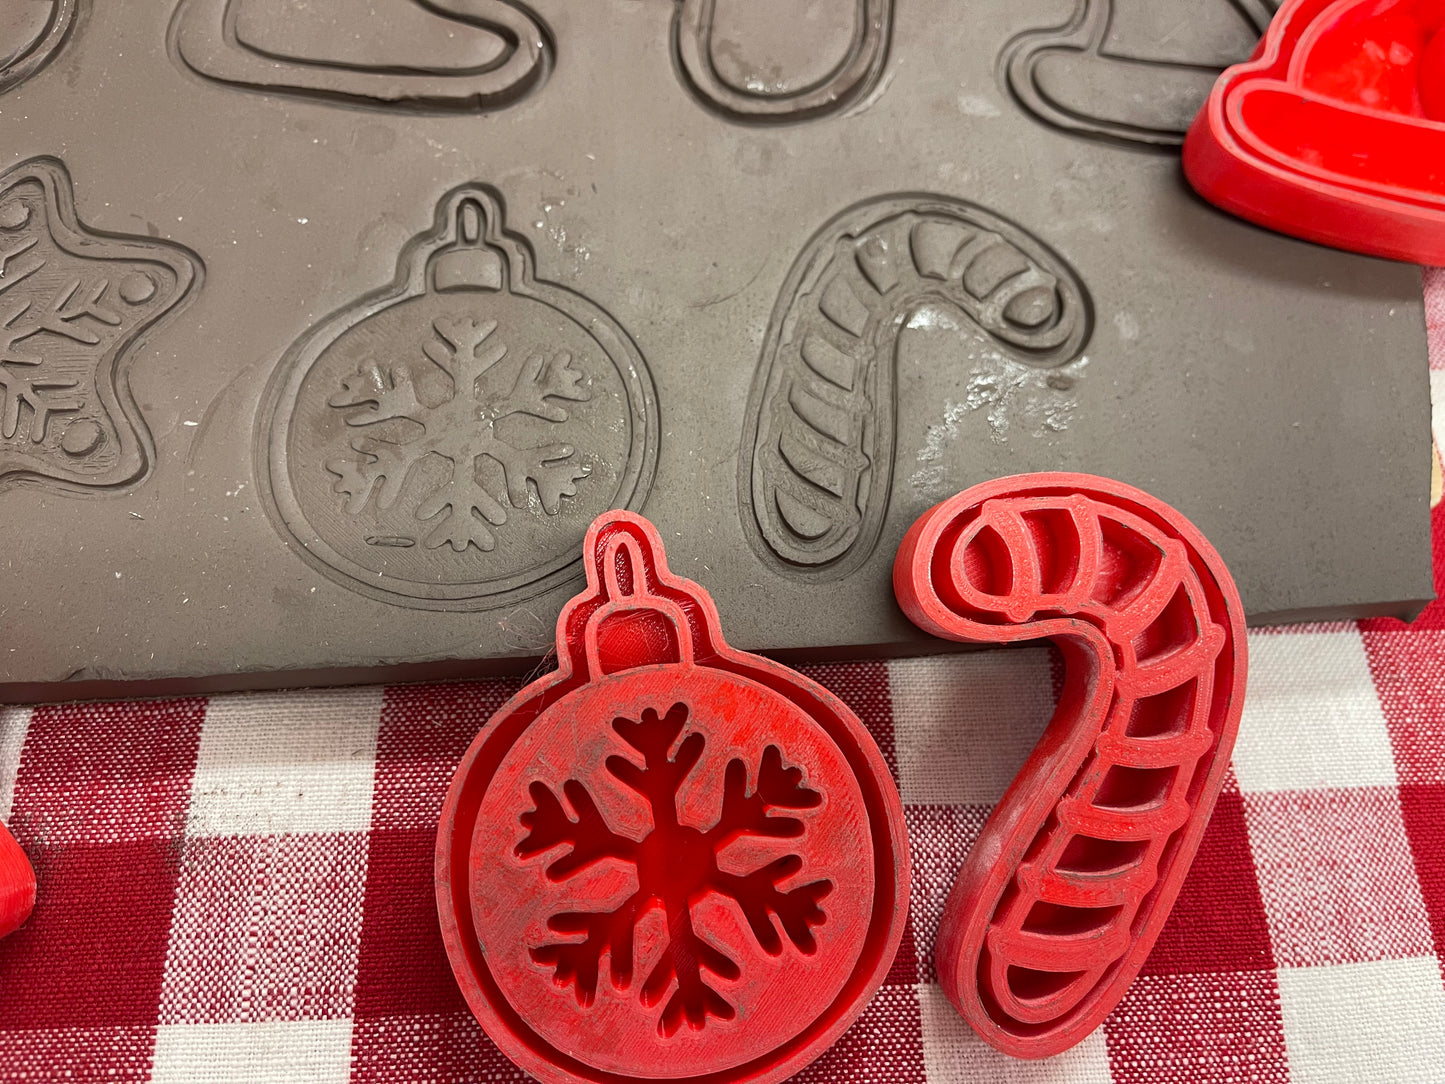 Pottery Stamp, Christmas Gingerbread Cookies various designs, with optional cookie cutter ornament - multiple sizes